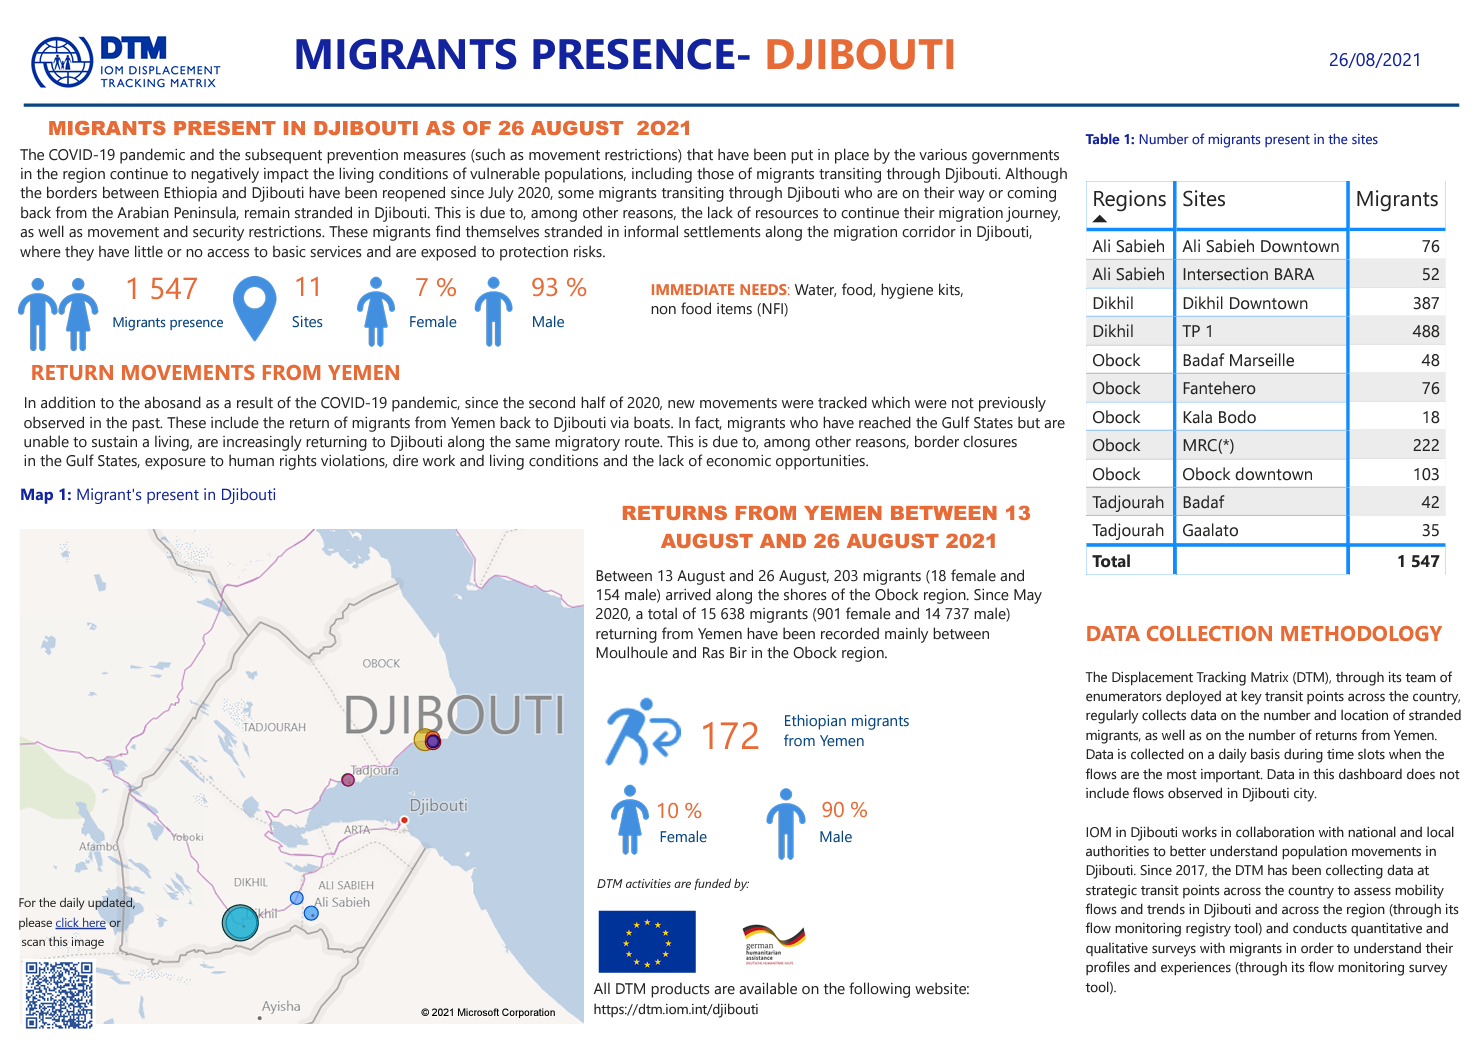 Djibouti - Migrants presence (as of 26 August 2021)